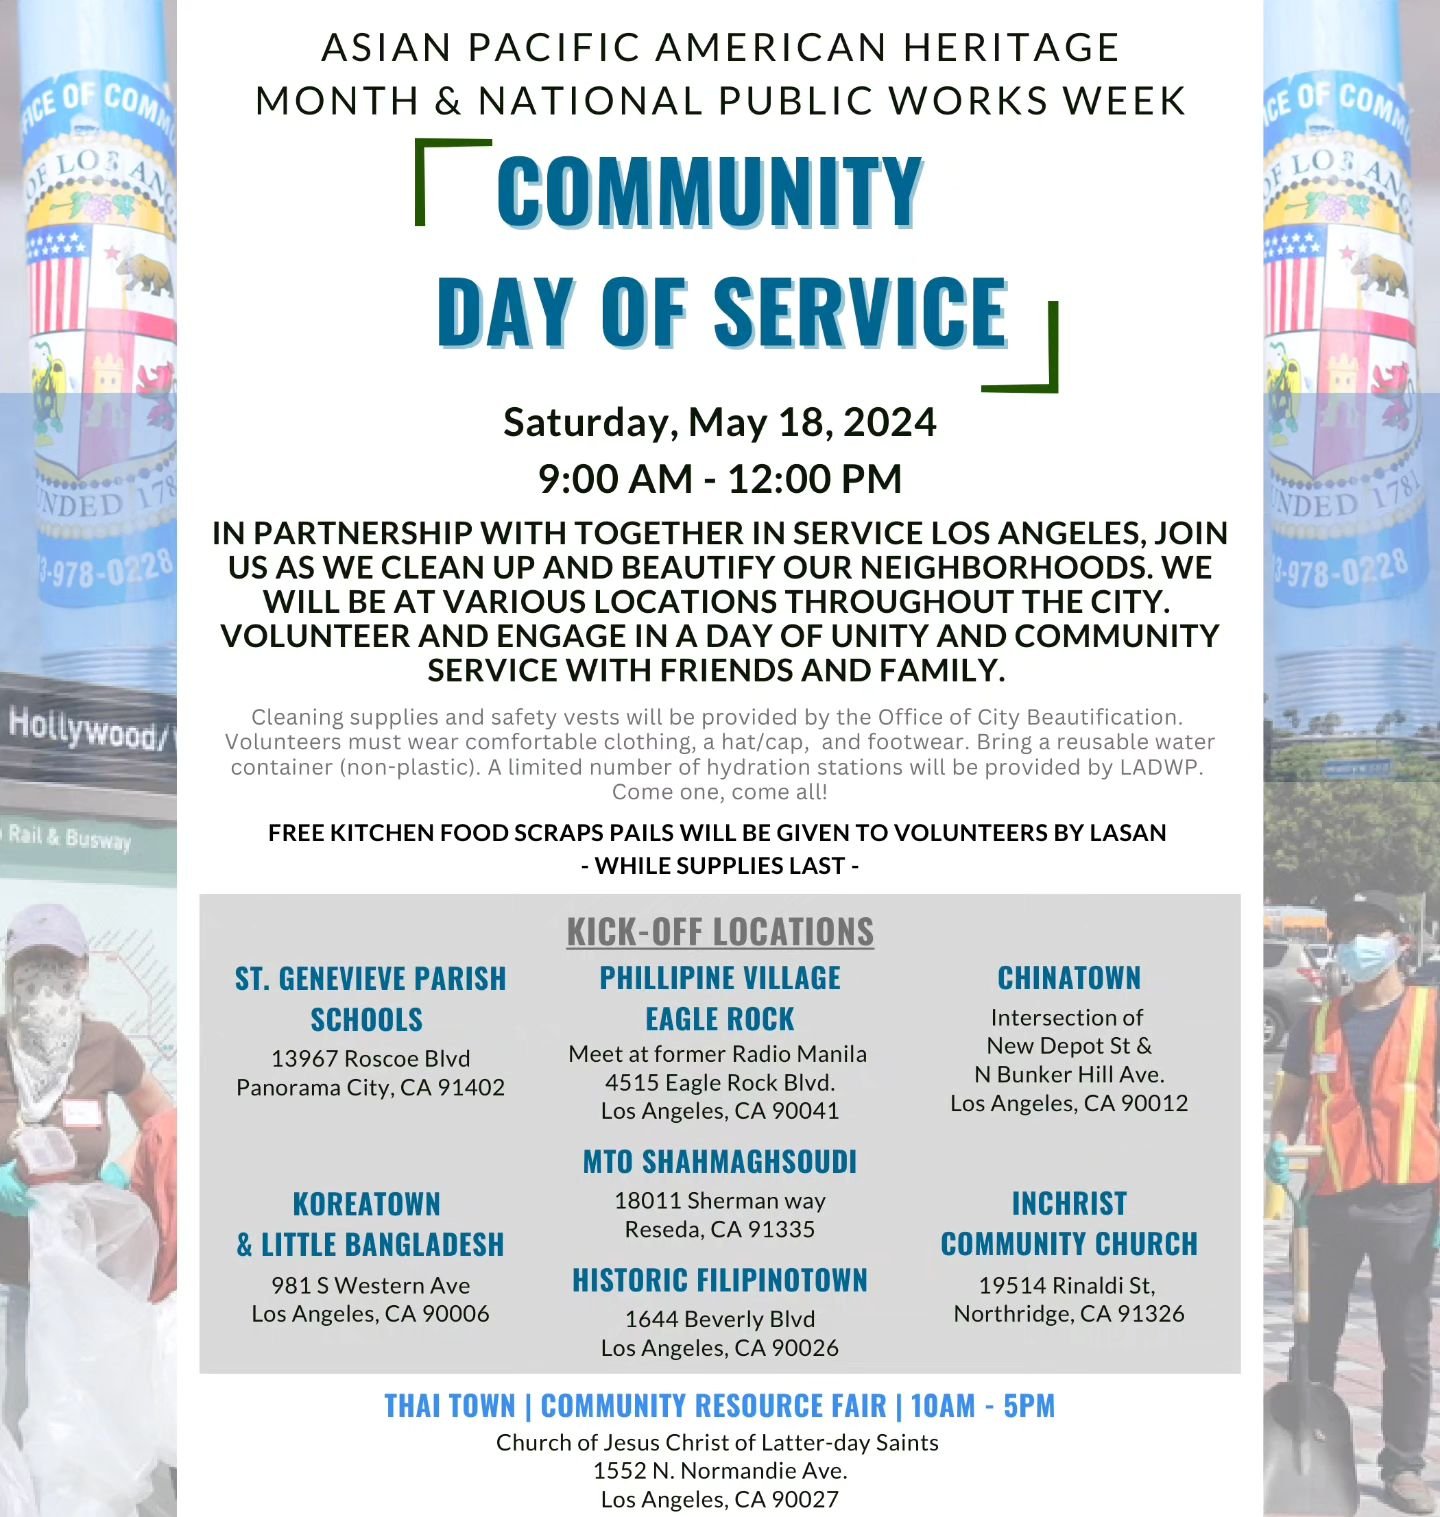 Come join us for the AAPI Community Clean Up event, where we work together to make our community clean! We will be meeting for the Koreatown clean up at KAFLA located at 981 S Western Ave. Please make sure to wear comfortable clothing and don't forge